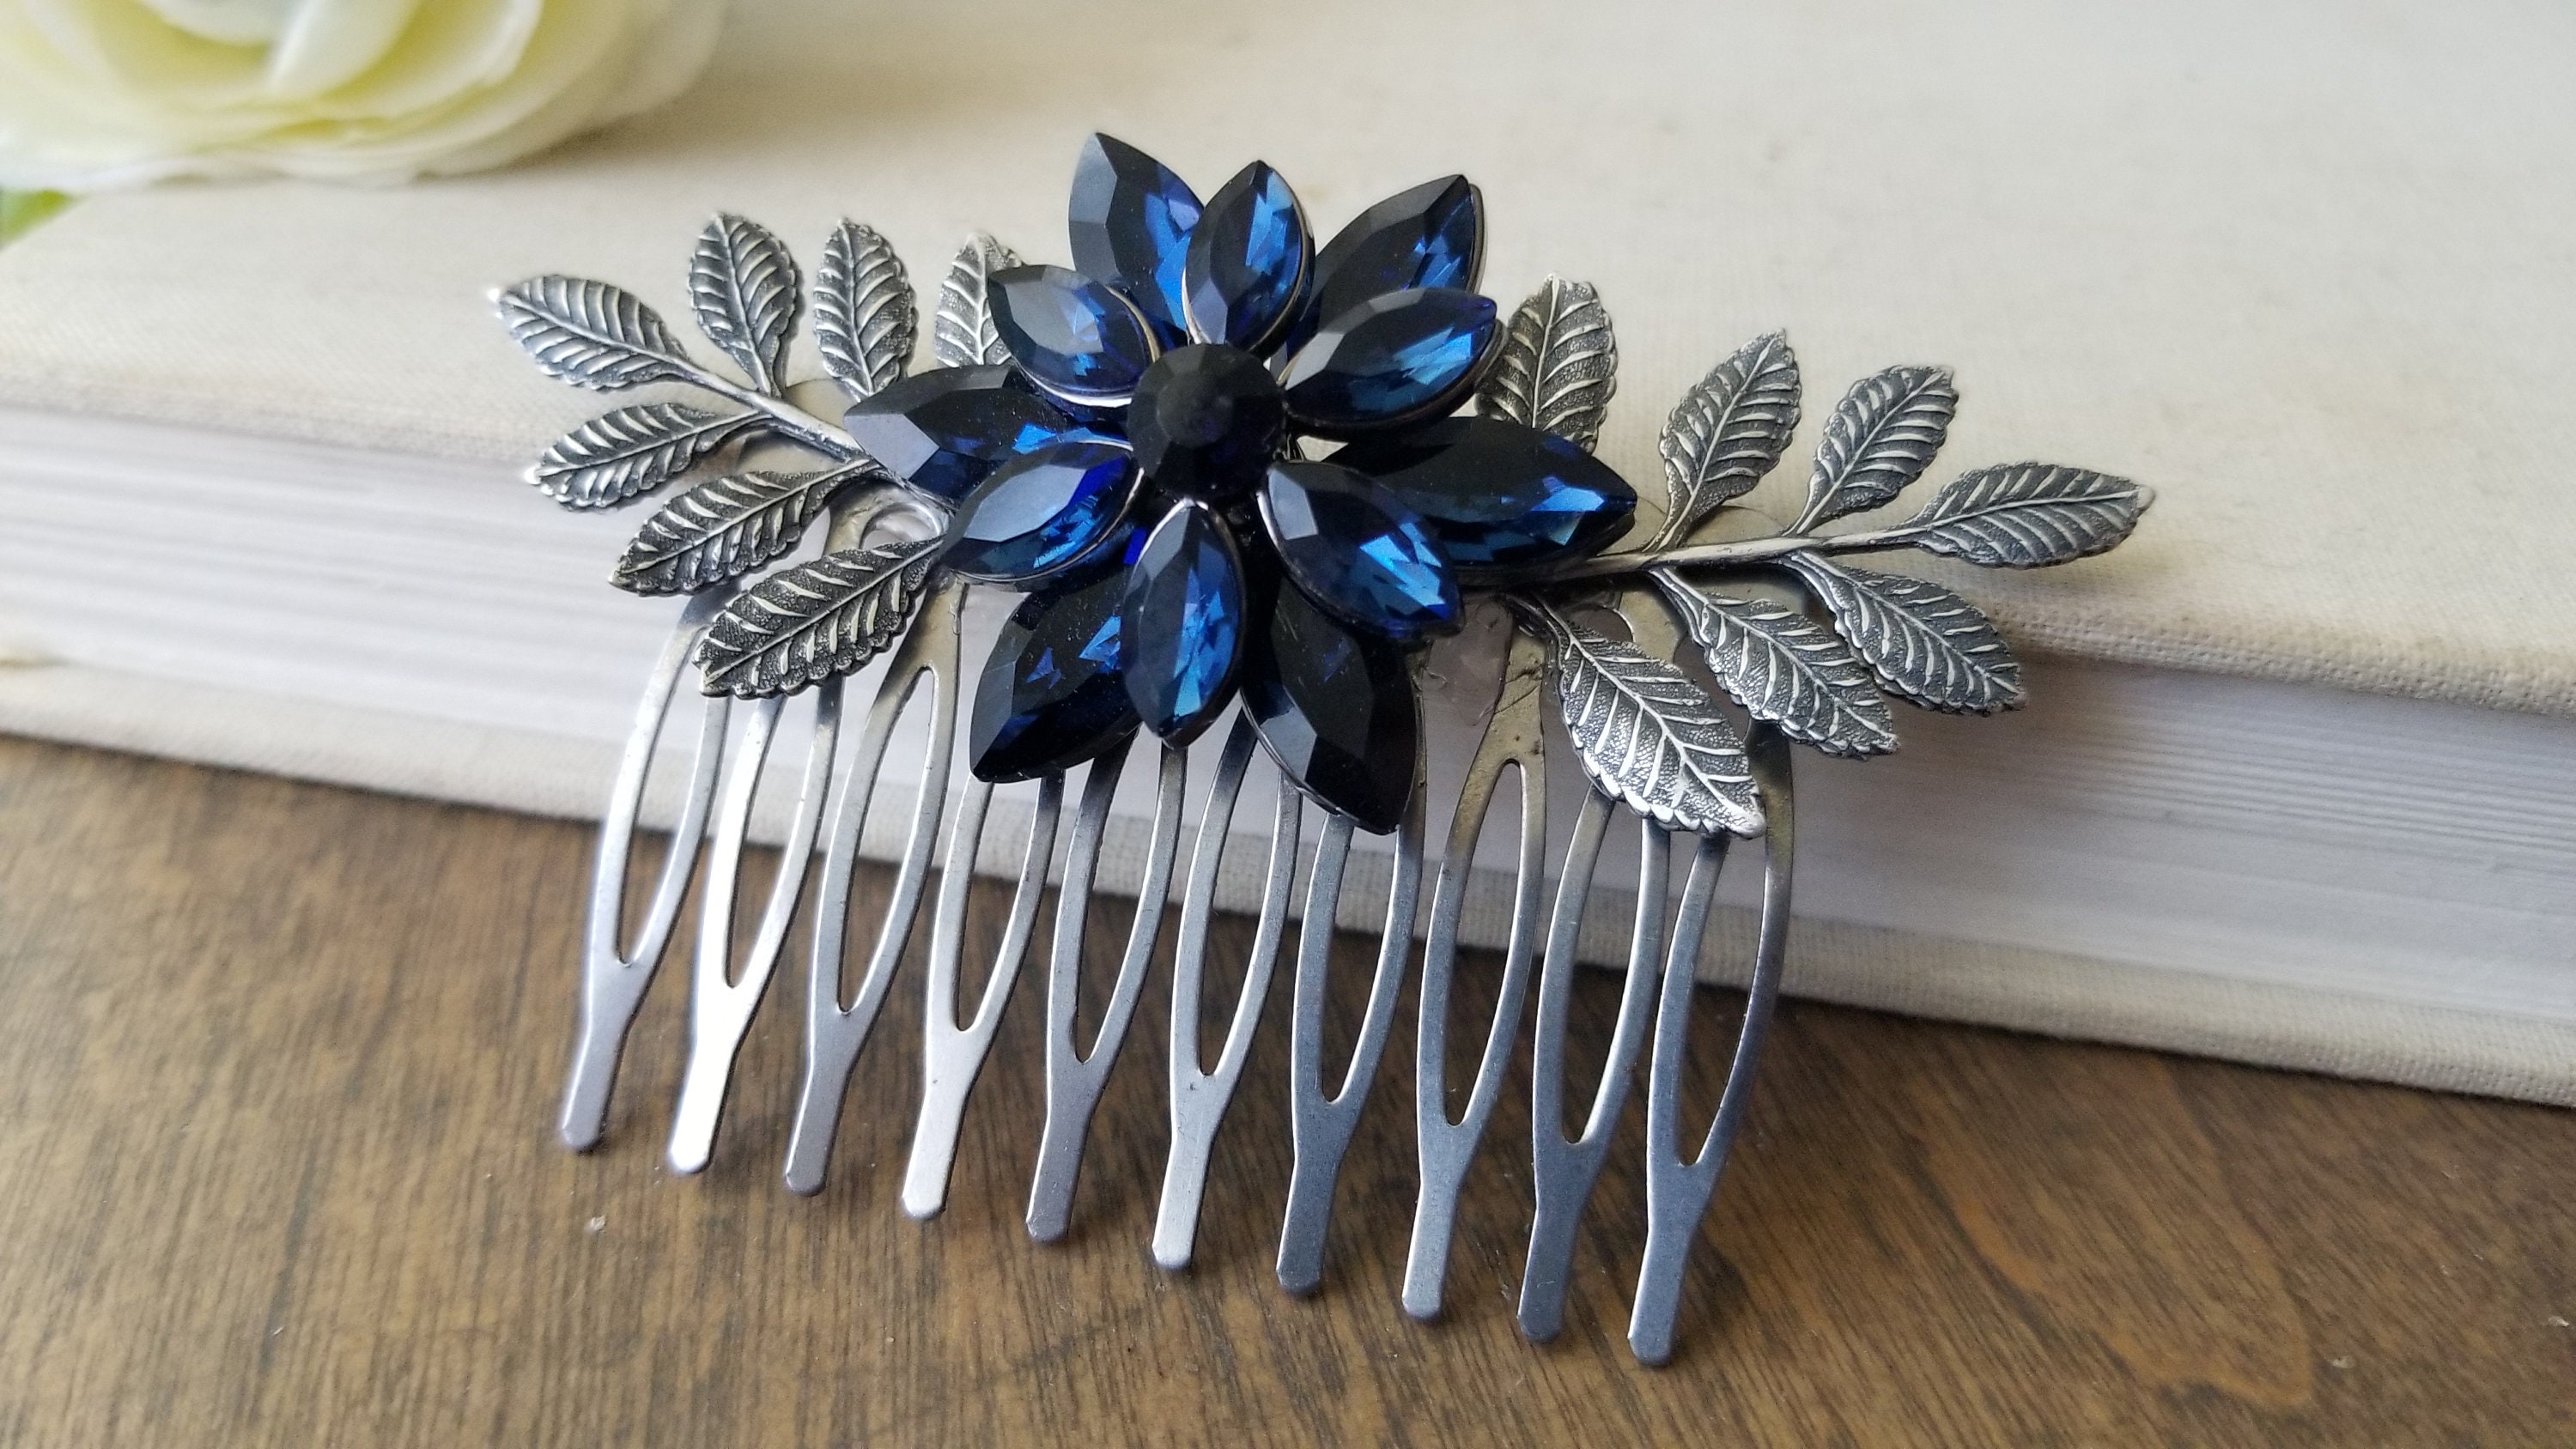 Materials for Creating Jewelry. Navy Blue Rhinestones, Hair Combs, Metal  Flowers on a Paper Background Stock Photo - Image of design, creativity:  194059696